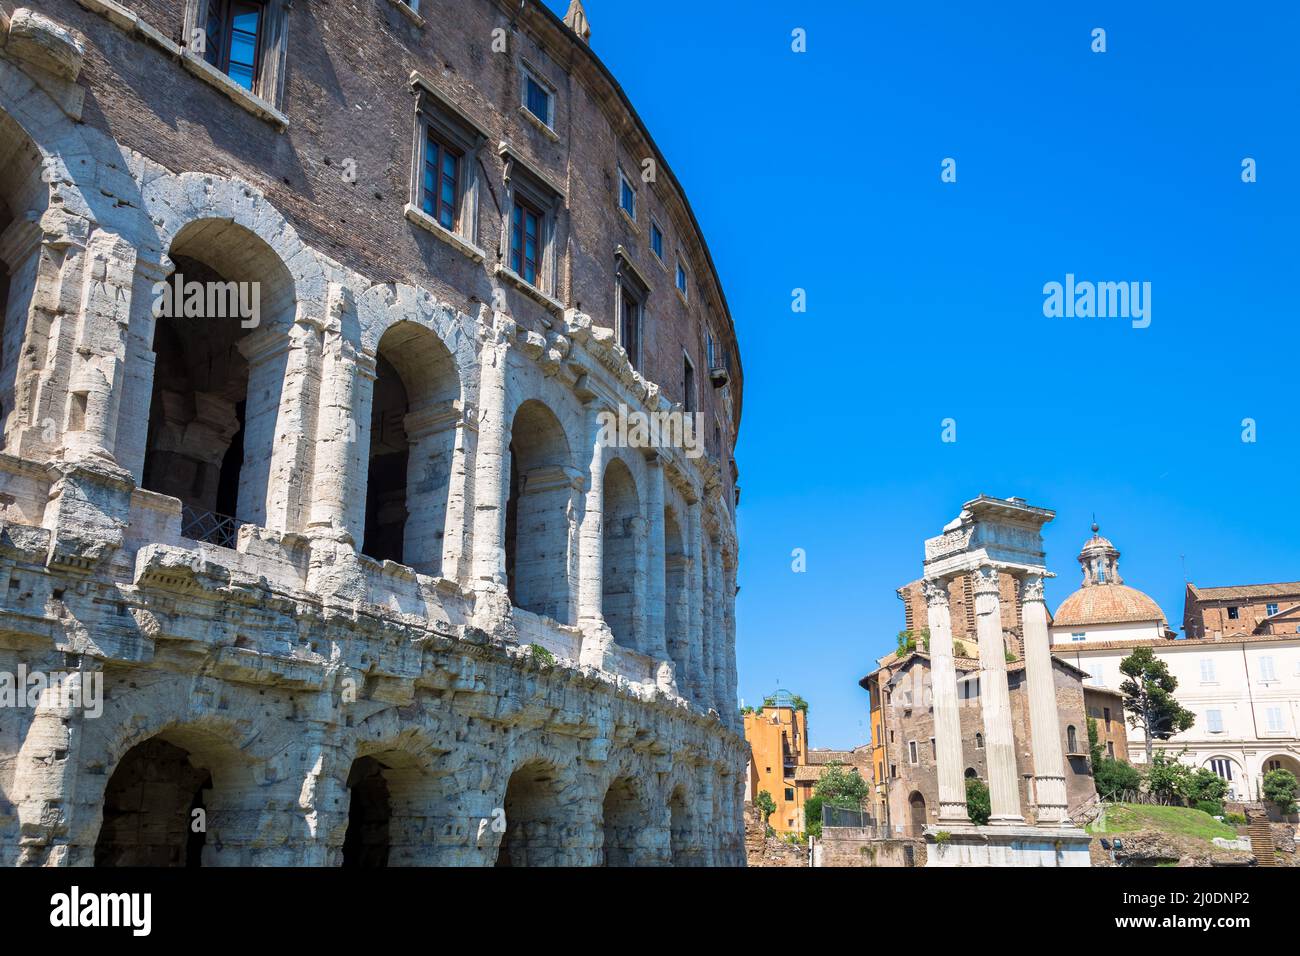 Ancient exterior of Teatro Macello (Theater of Marcellus) located very  close to Colosseum, Rome, Italy Stock Photo - Alamy